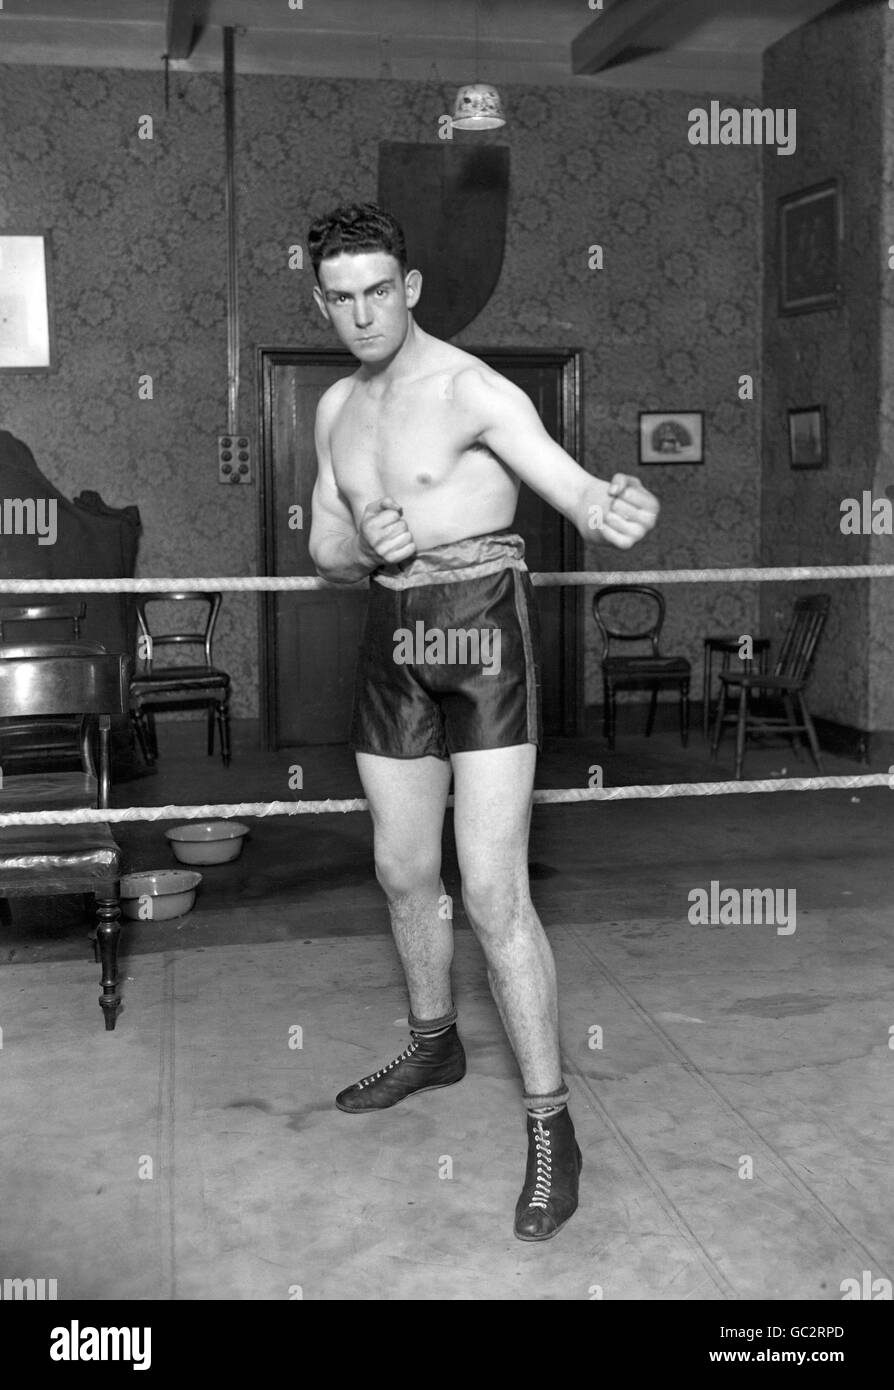 Heavyweight boxers Black and White Stock Photos & Images - Alamy